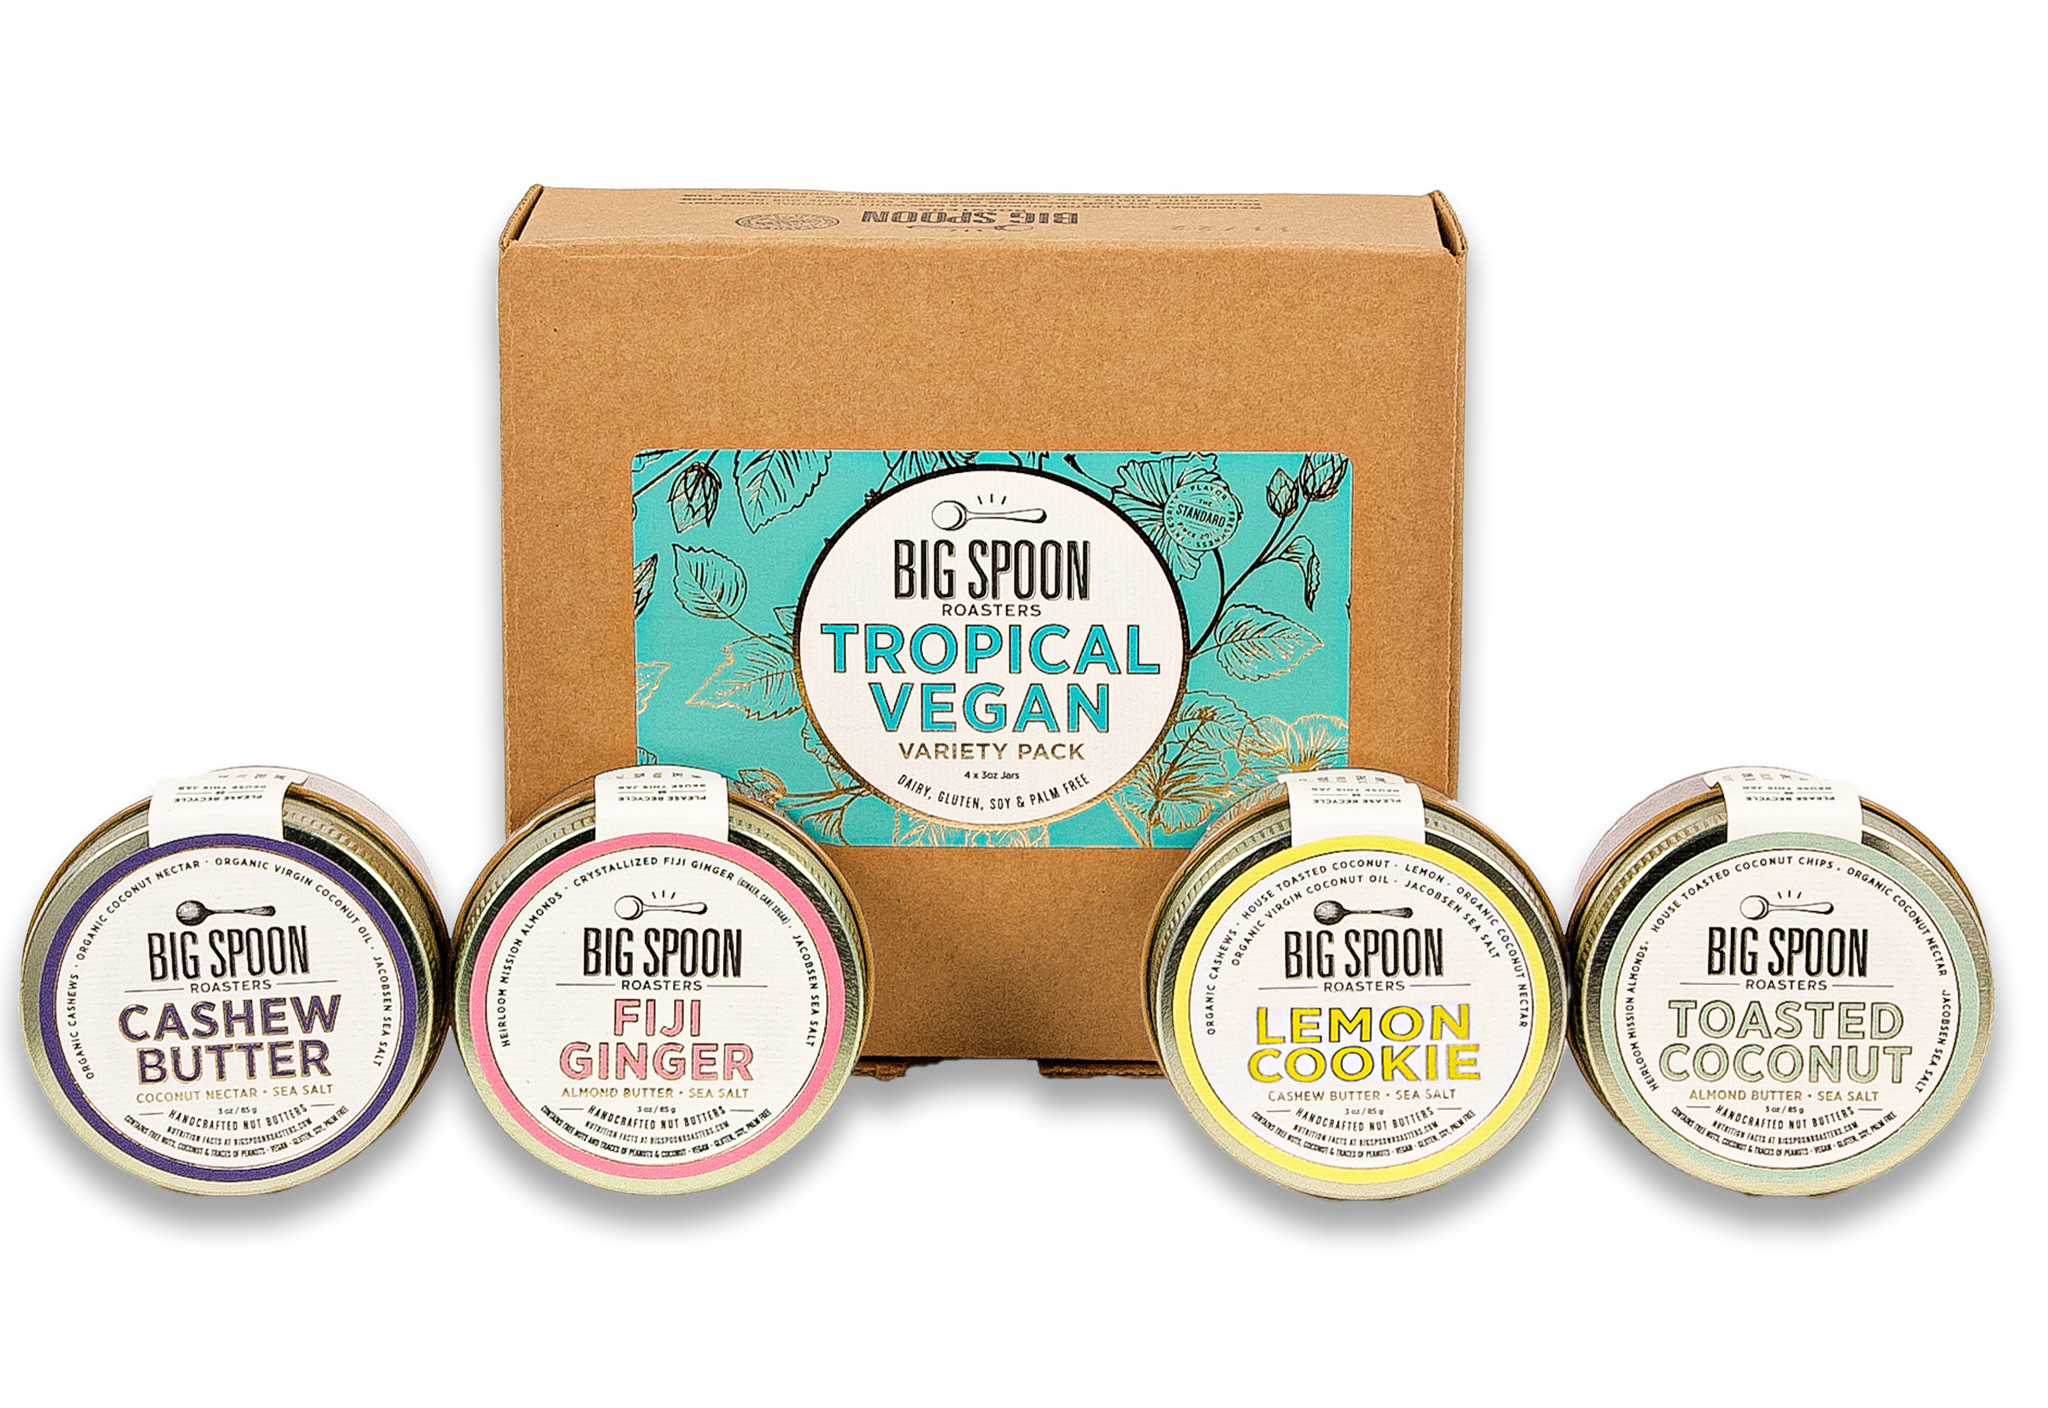 3oz Jars of Cashew Butter, Fiji Ginger, Lemon Cookie, Toasted Coconut in front of Tropical Vegan gift box